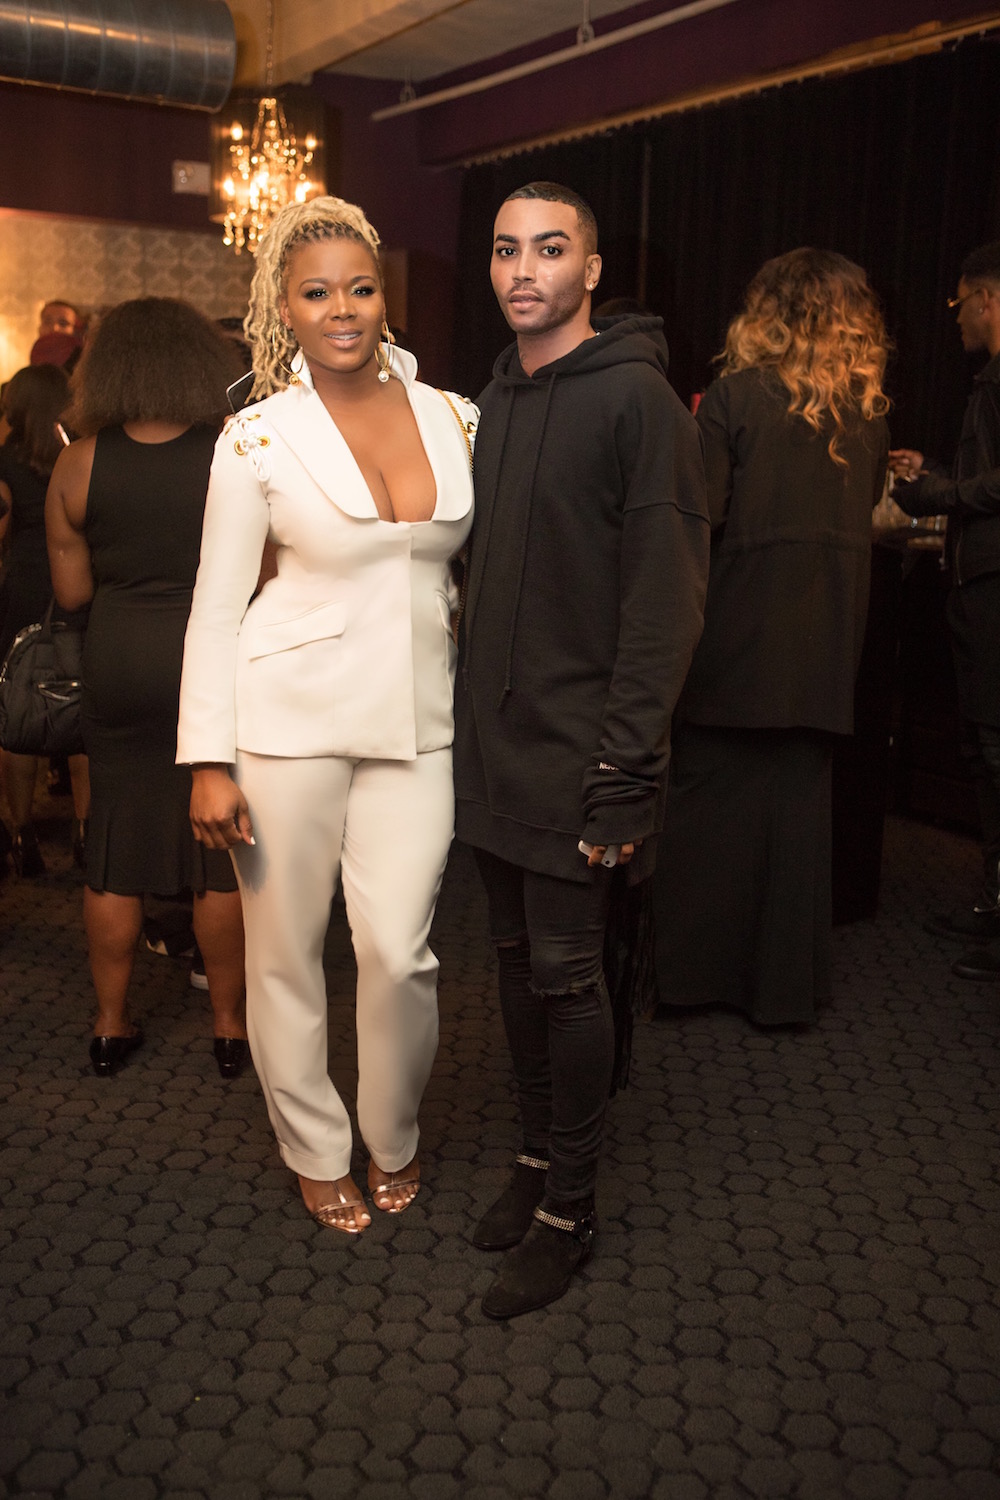 daniel-hawkins-fashion-bomb-dailys-10th-year-anniversary-party-featuring-ty-hunter-christina-milian-june-ambrose-and-more